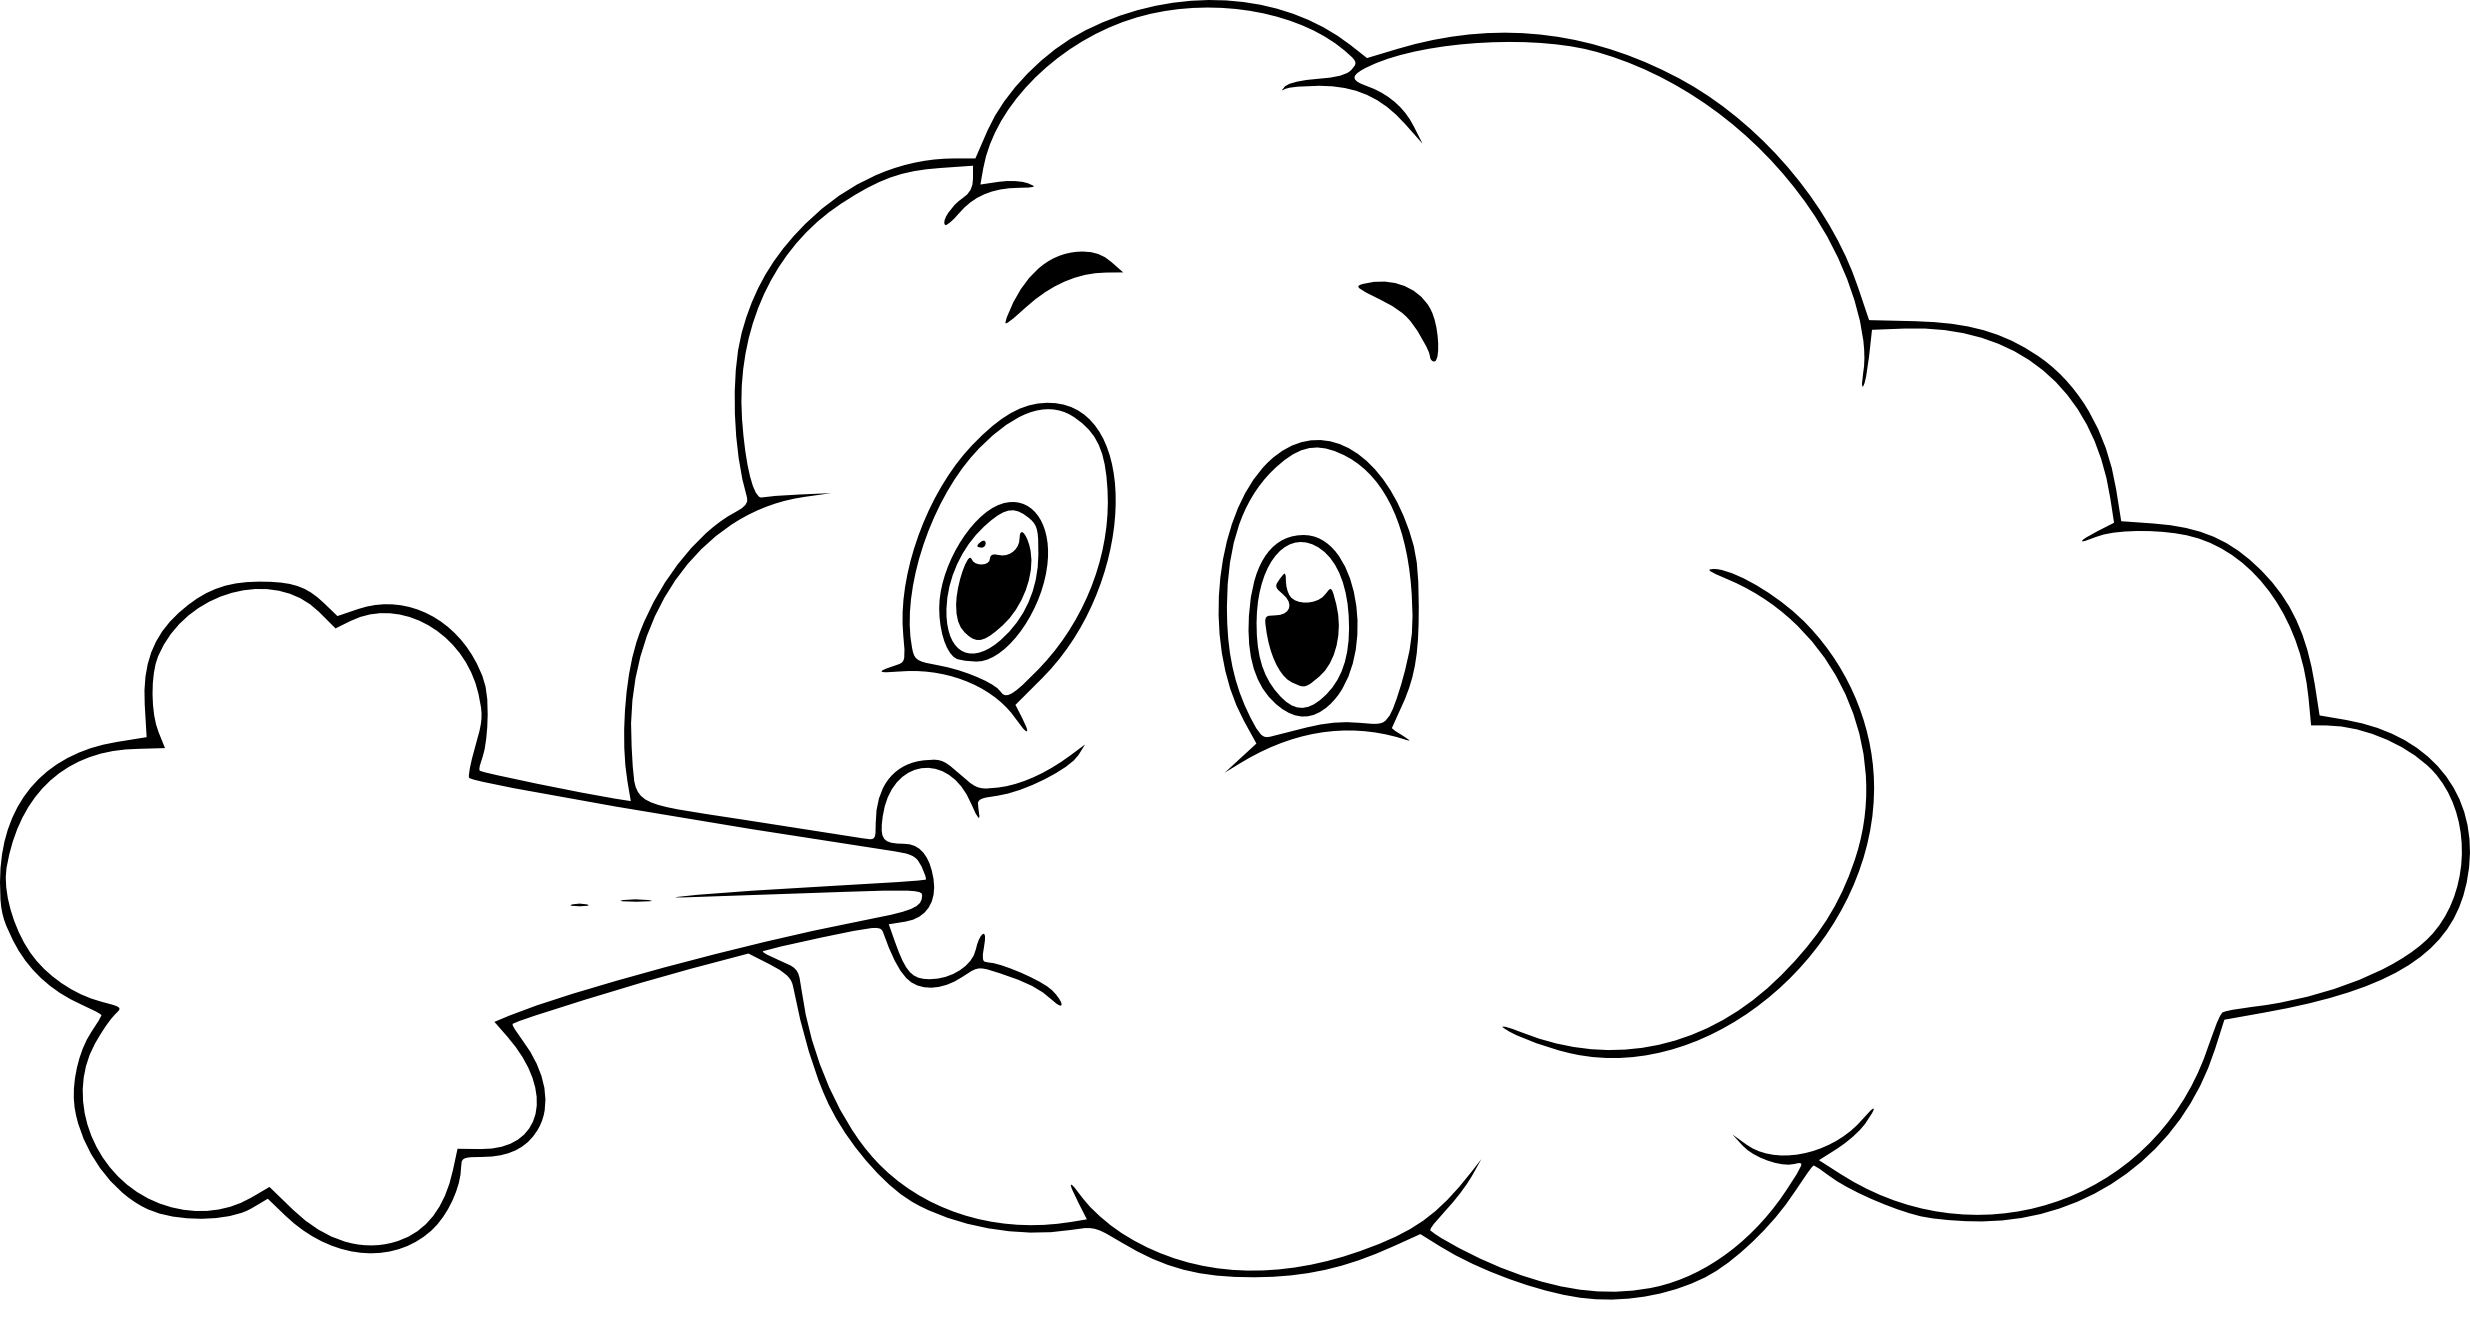 Wind That Blows coloring page